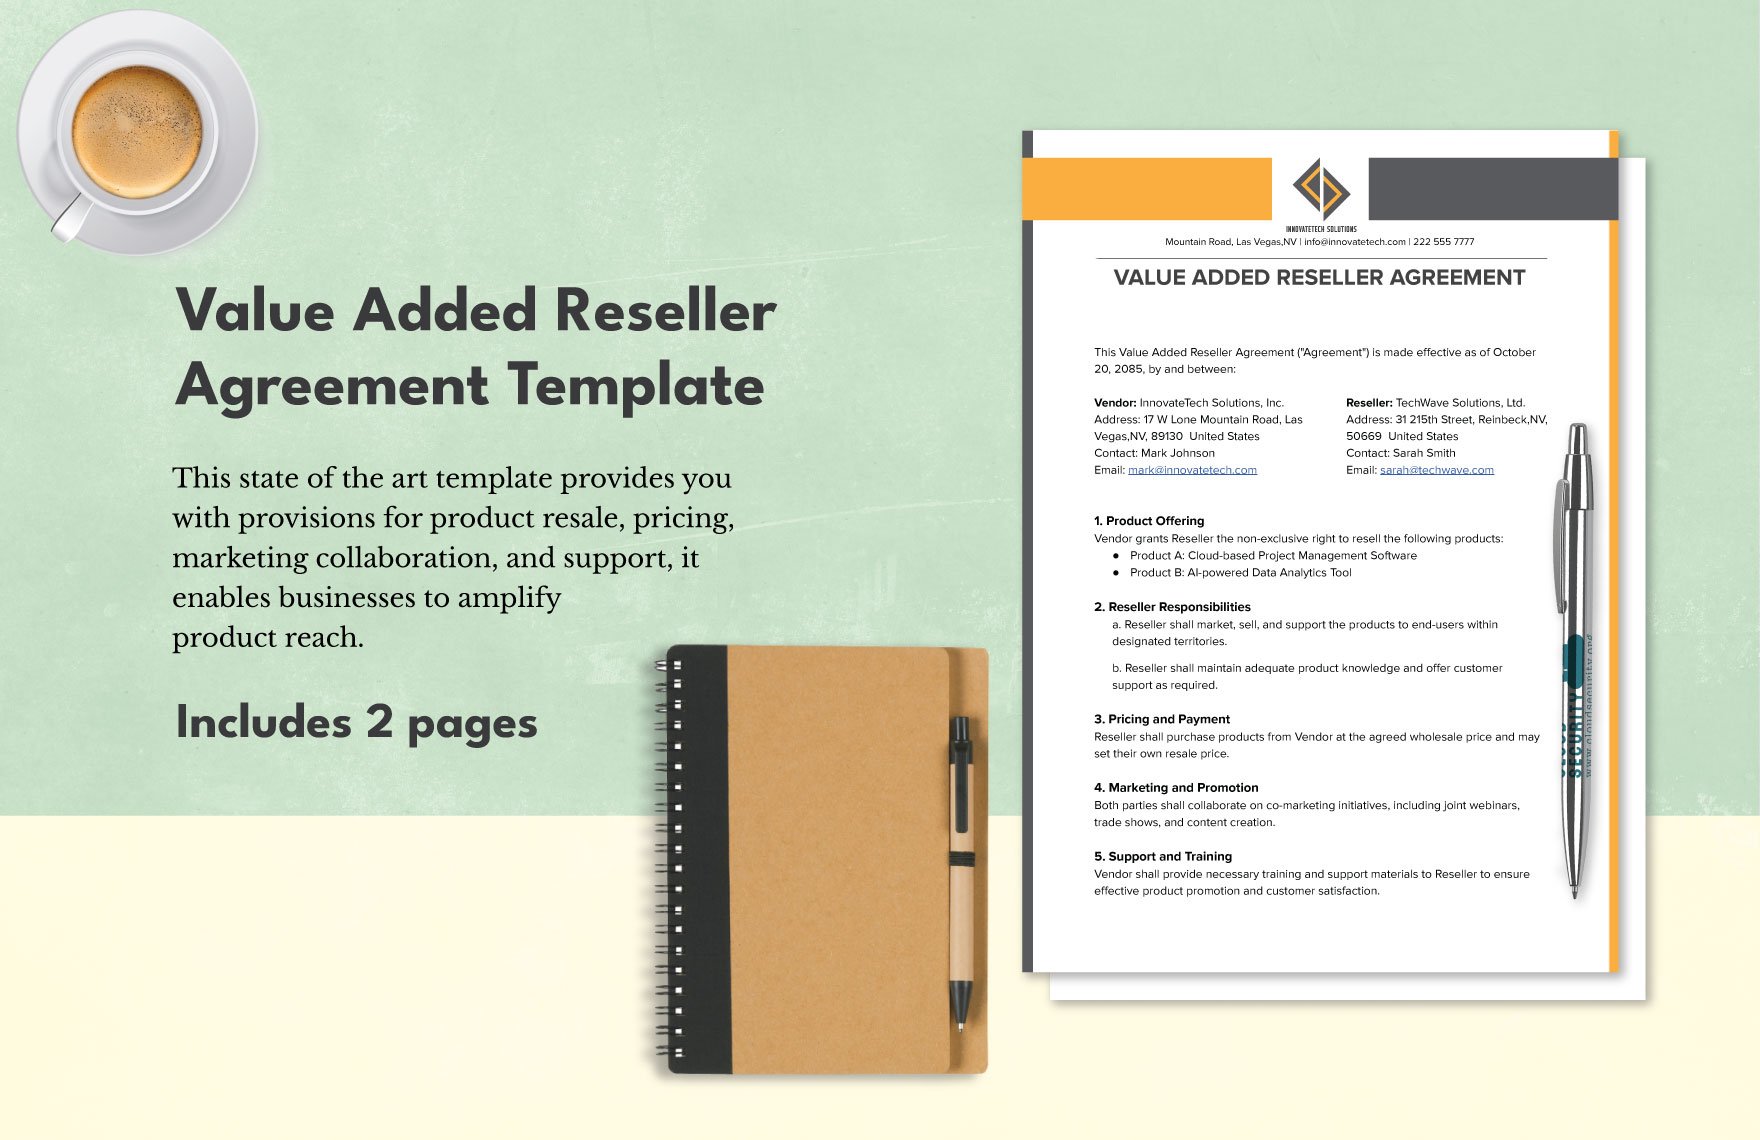 Value Added Reseller Agreement Template